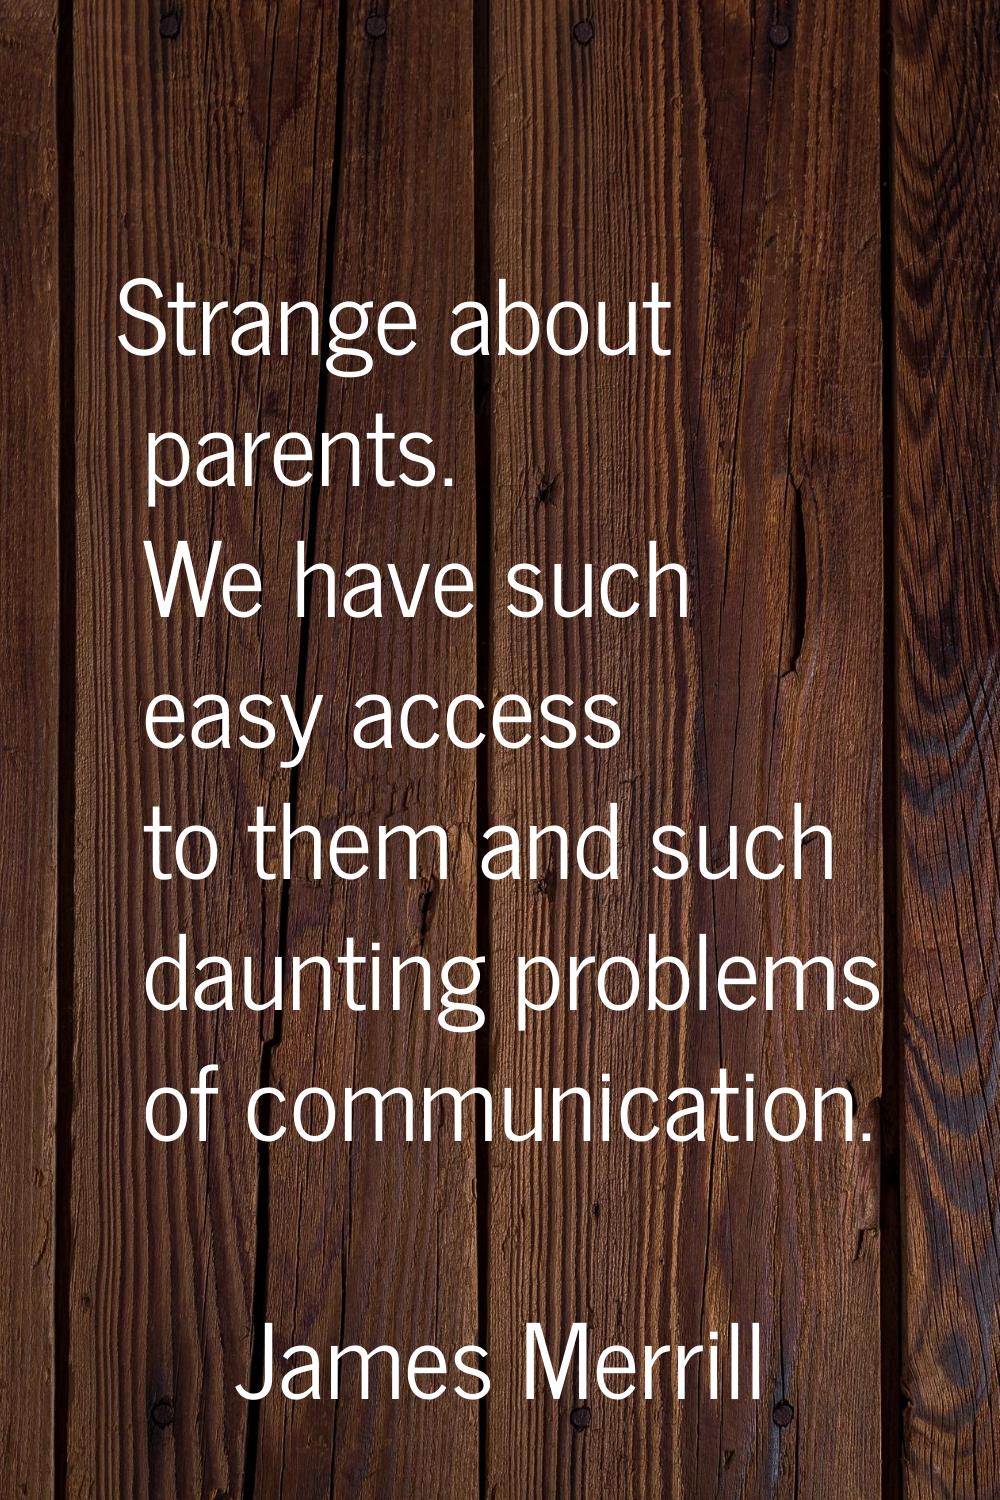 Strange about parents. We have such easy access to them and such daunting problems of communication